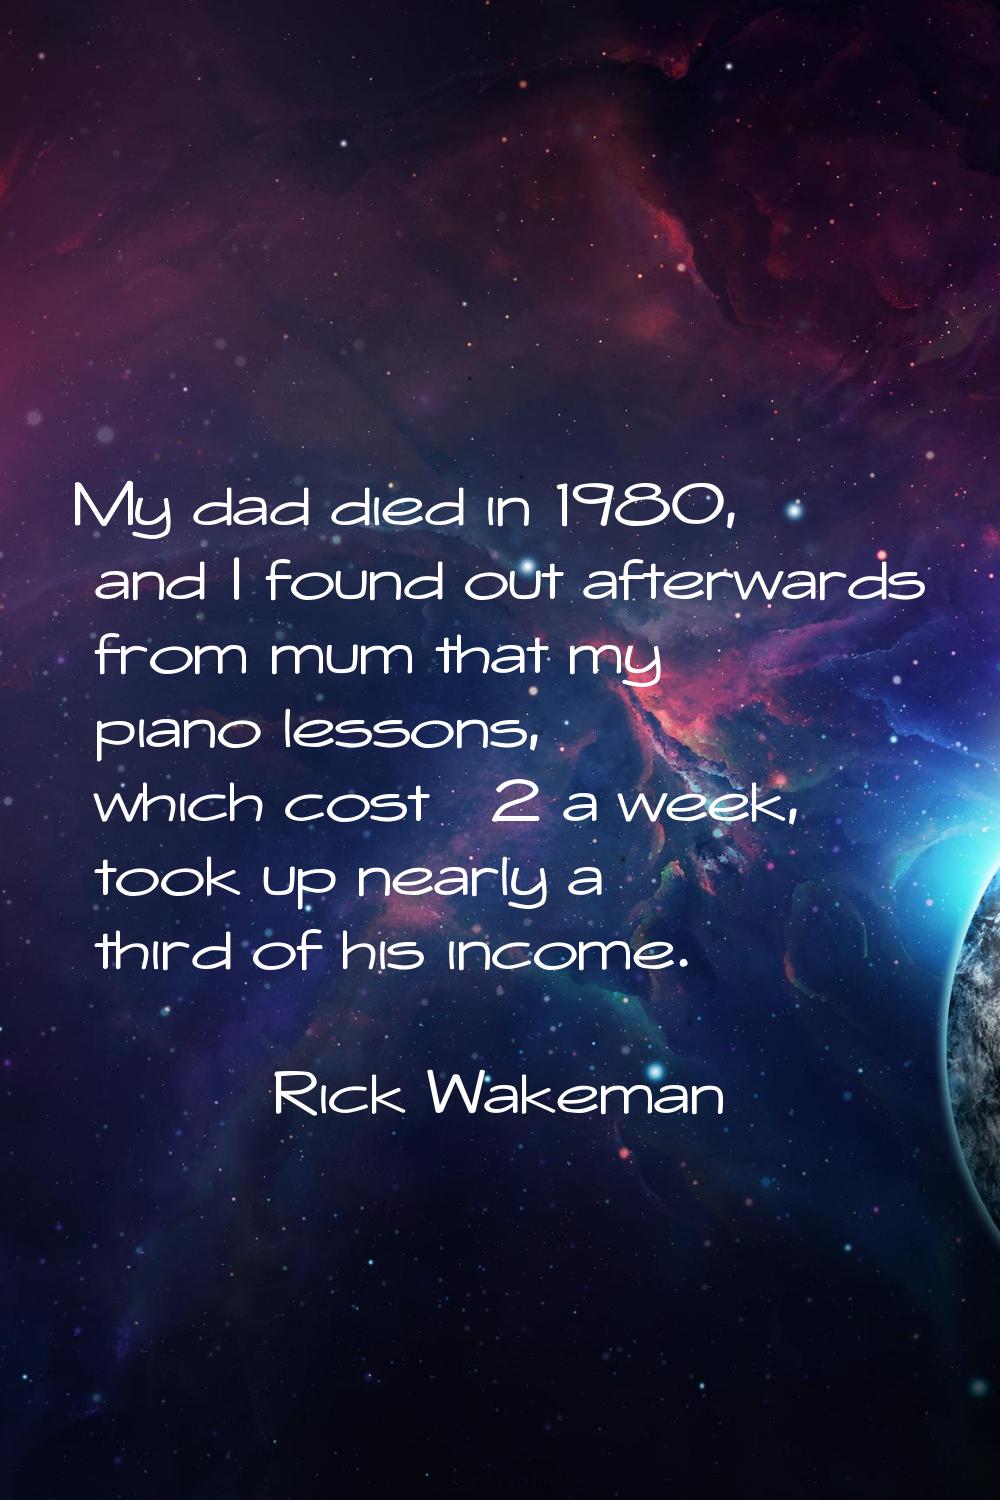 My dad died in 1980, and I found out afterwards from mum that my piano lessons, which cost £2 a wee